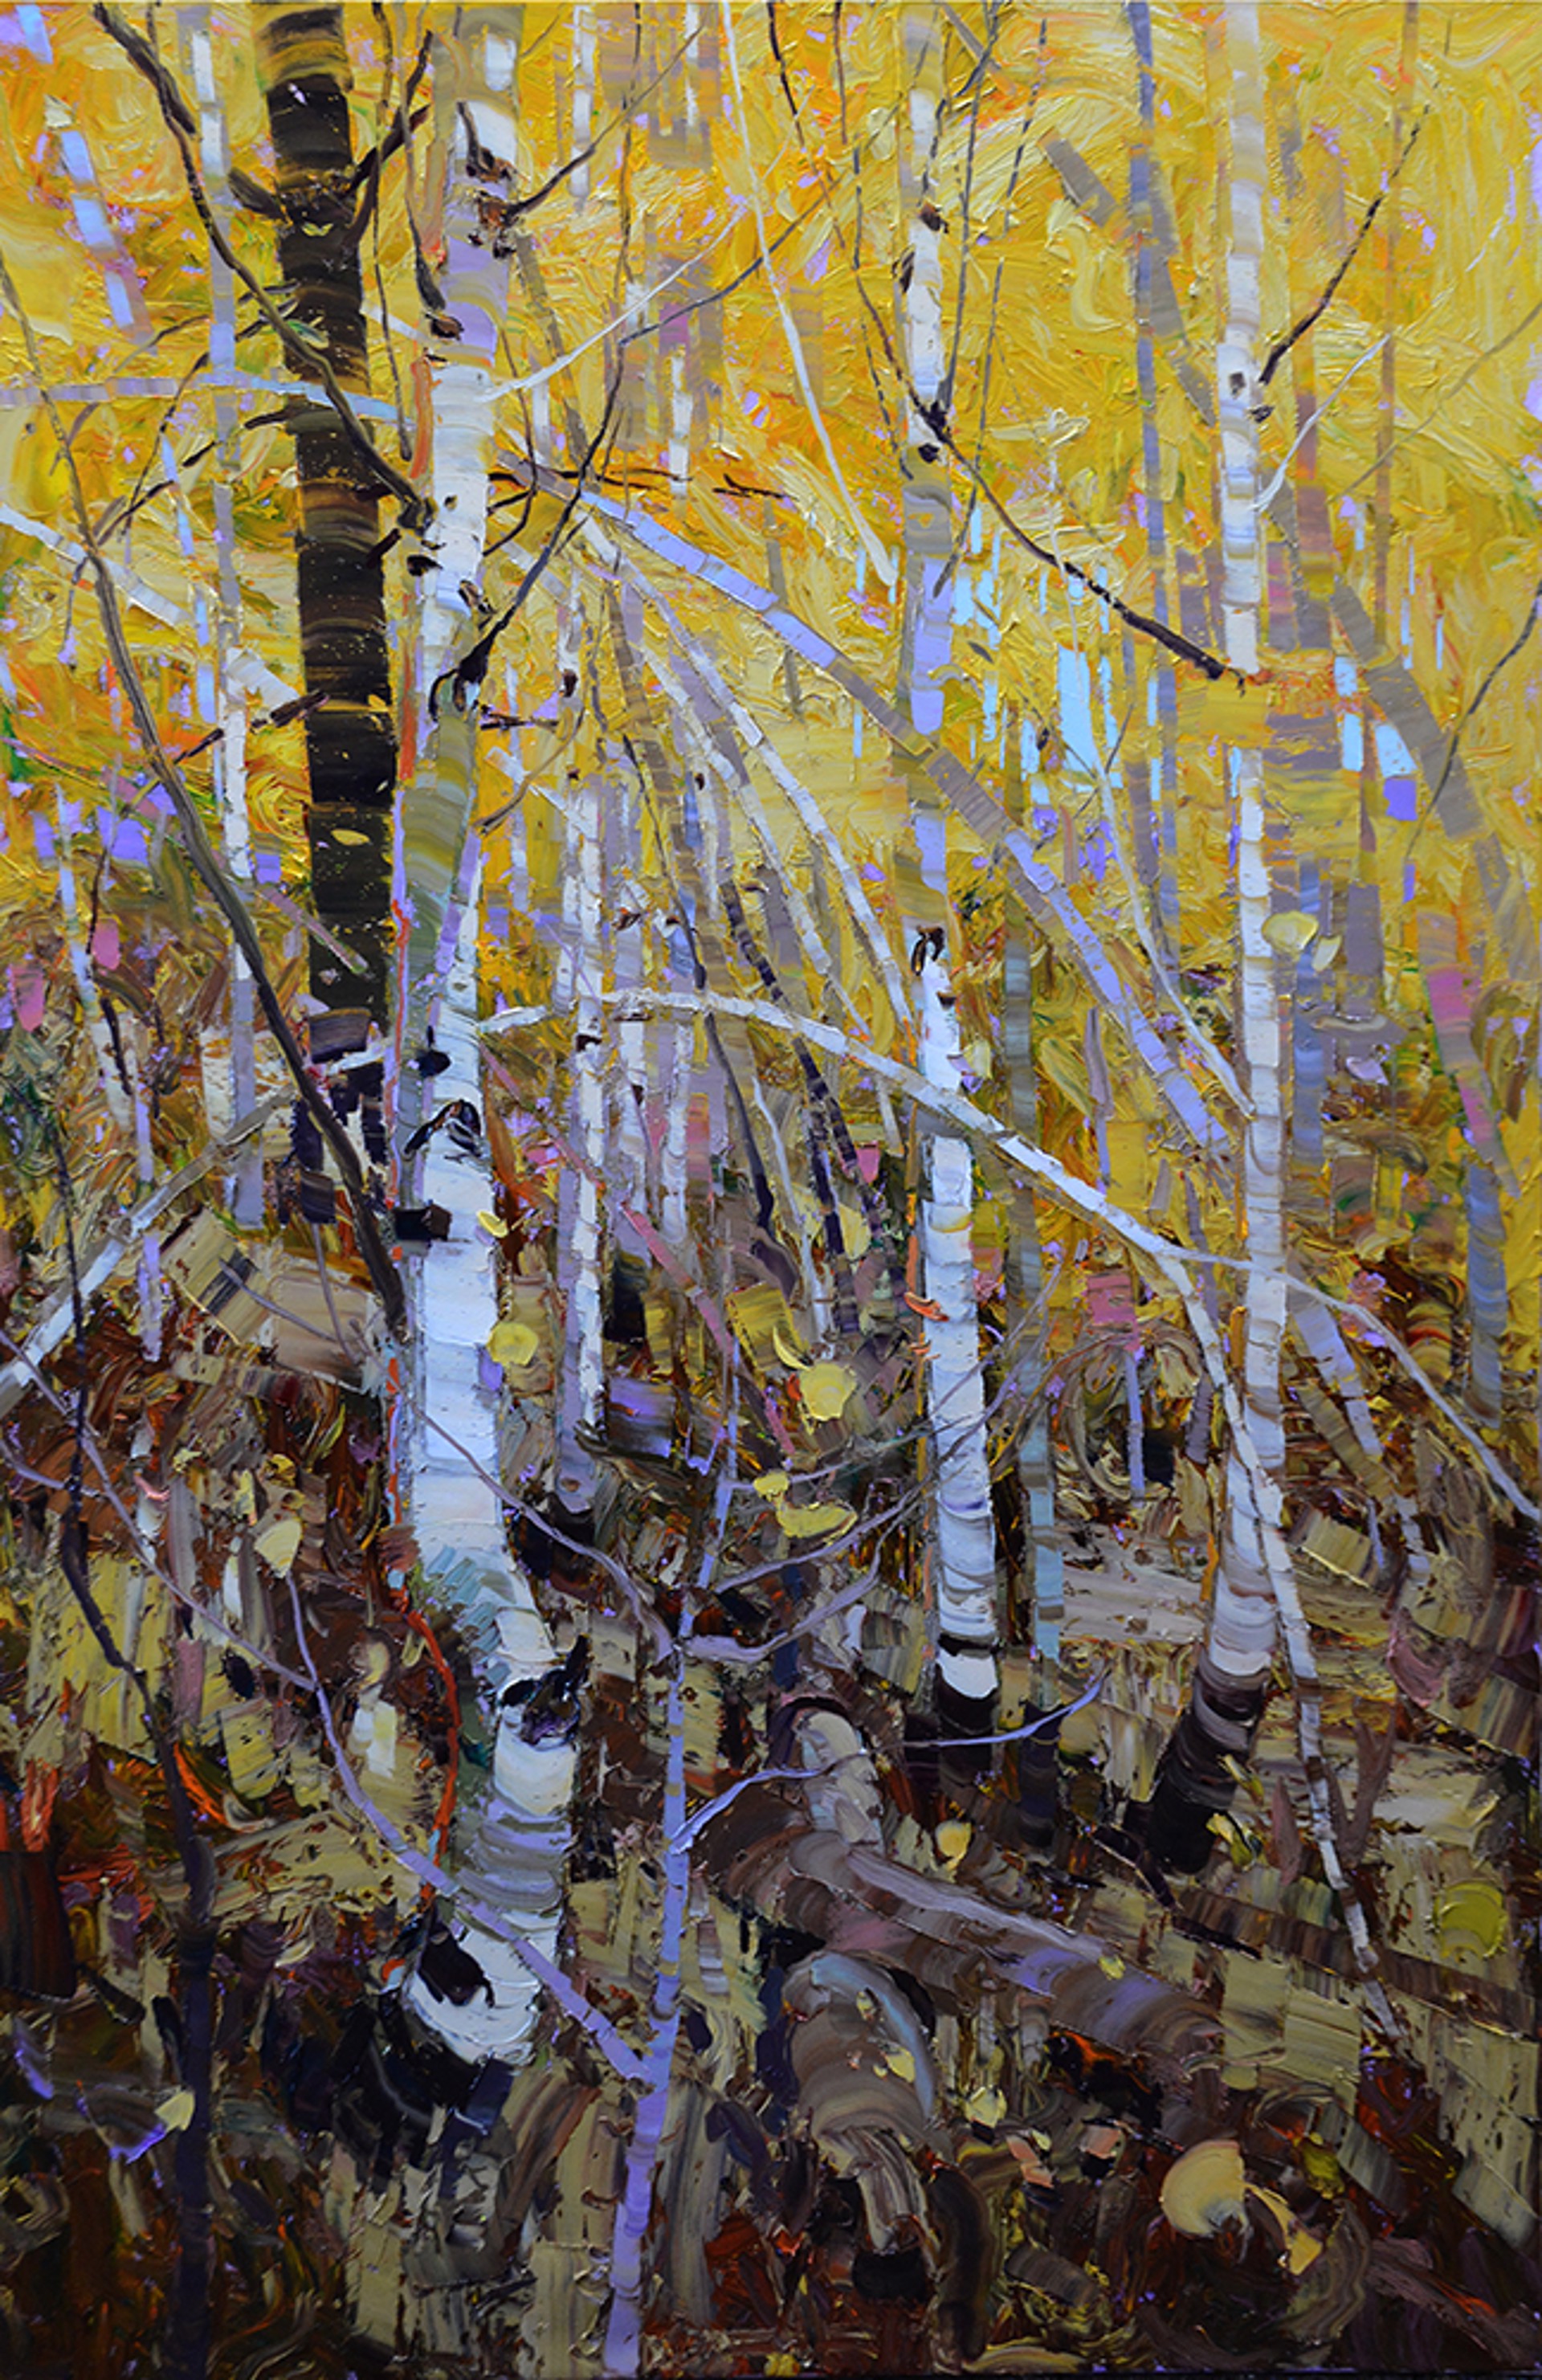 A Painting Of Yellow Aspen Trees In The Fall With White Bark And Dark Forest Floor, By Silas Thompson